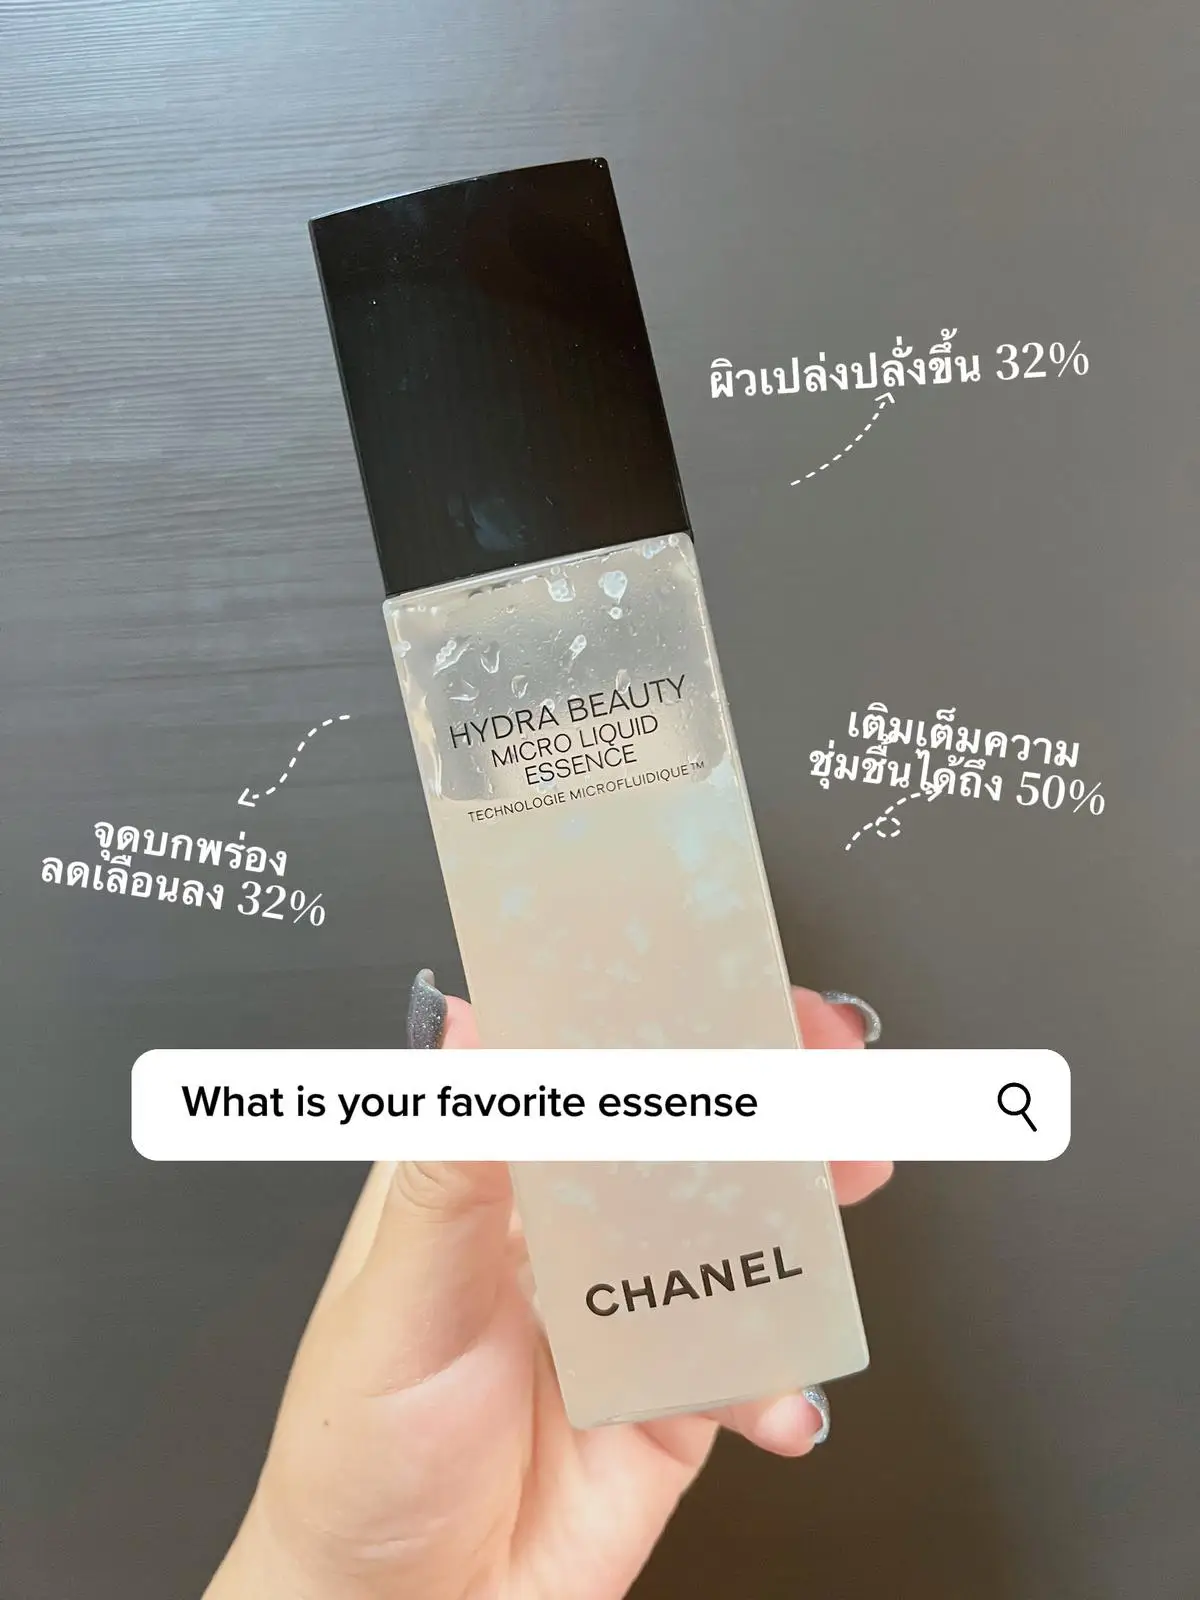 HYDRA BEAUTY MICRO LIQUID ESSENCE, Gallery posted by อาหยก 📸